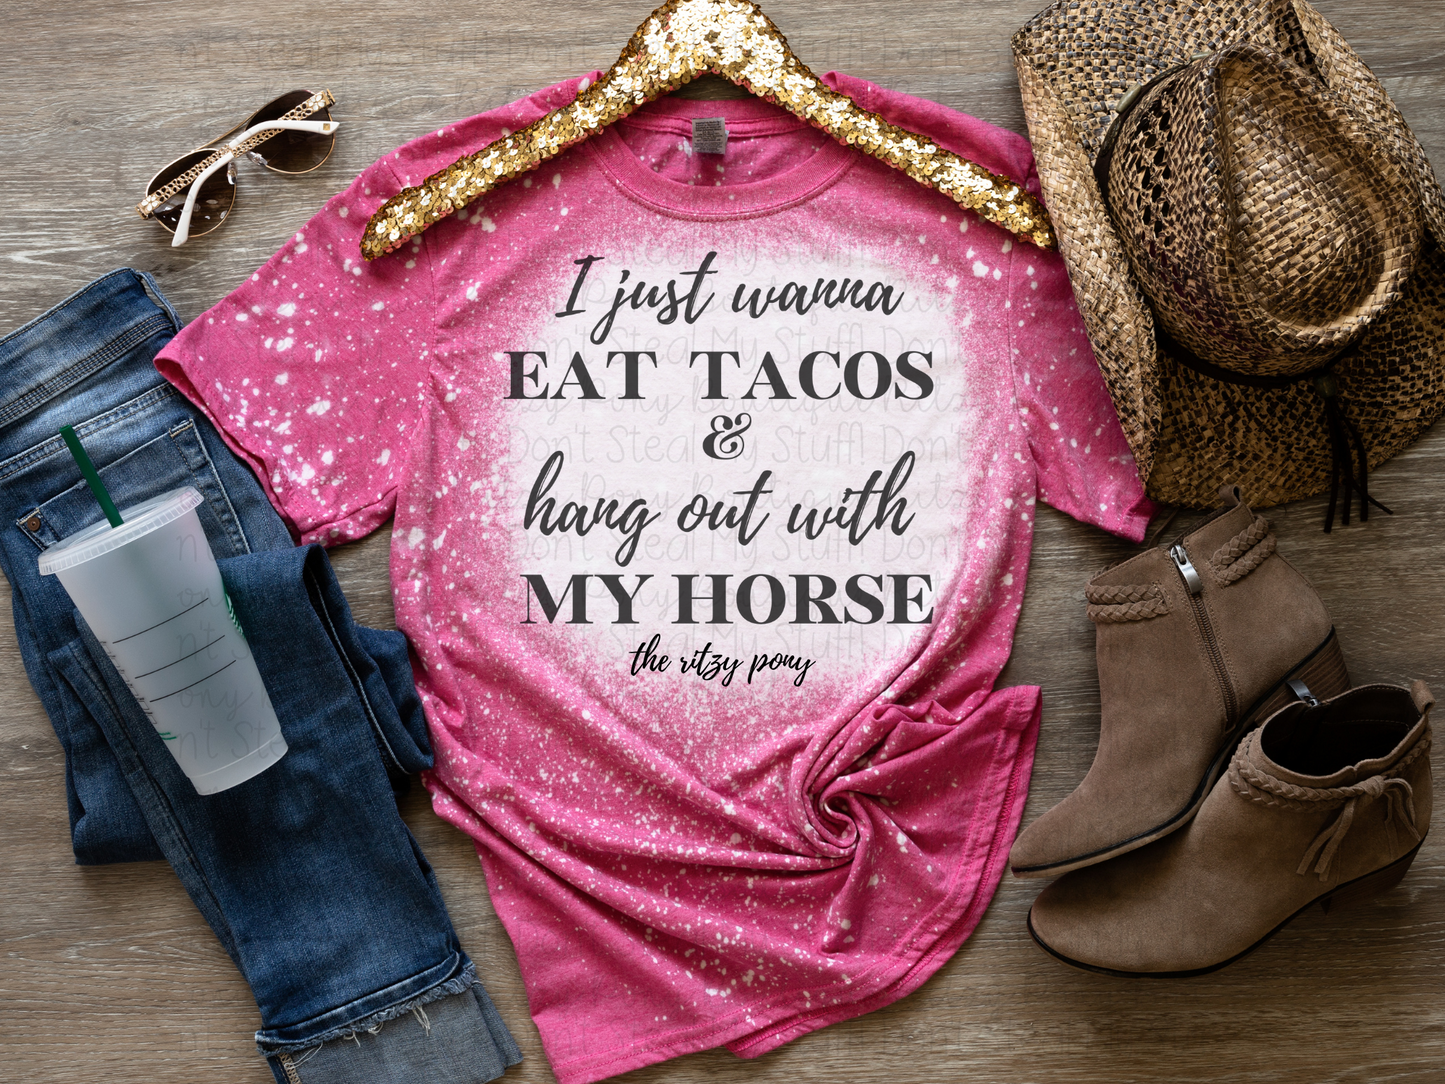 Eat Tacos & Hang Out with my Horse tshirt